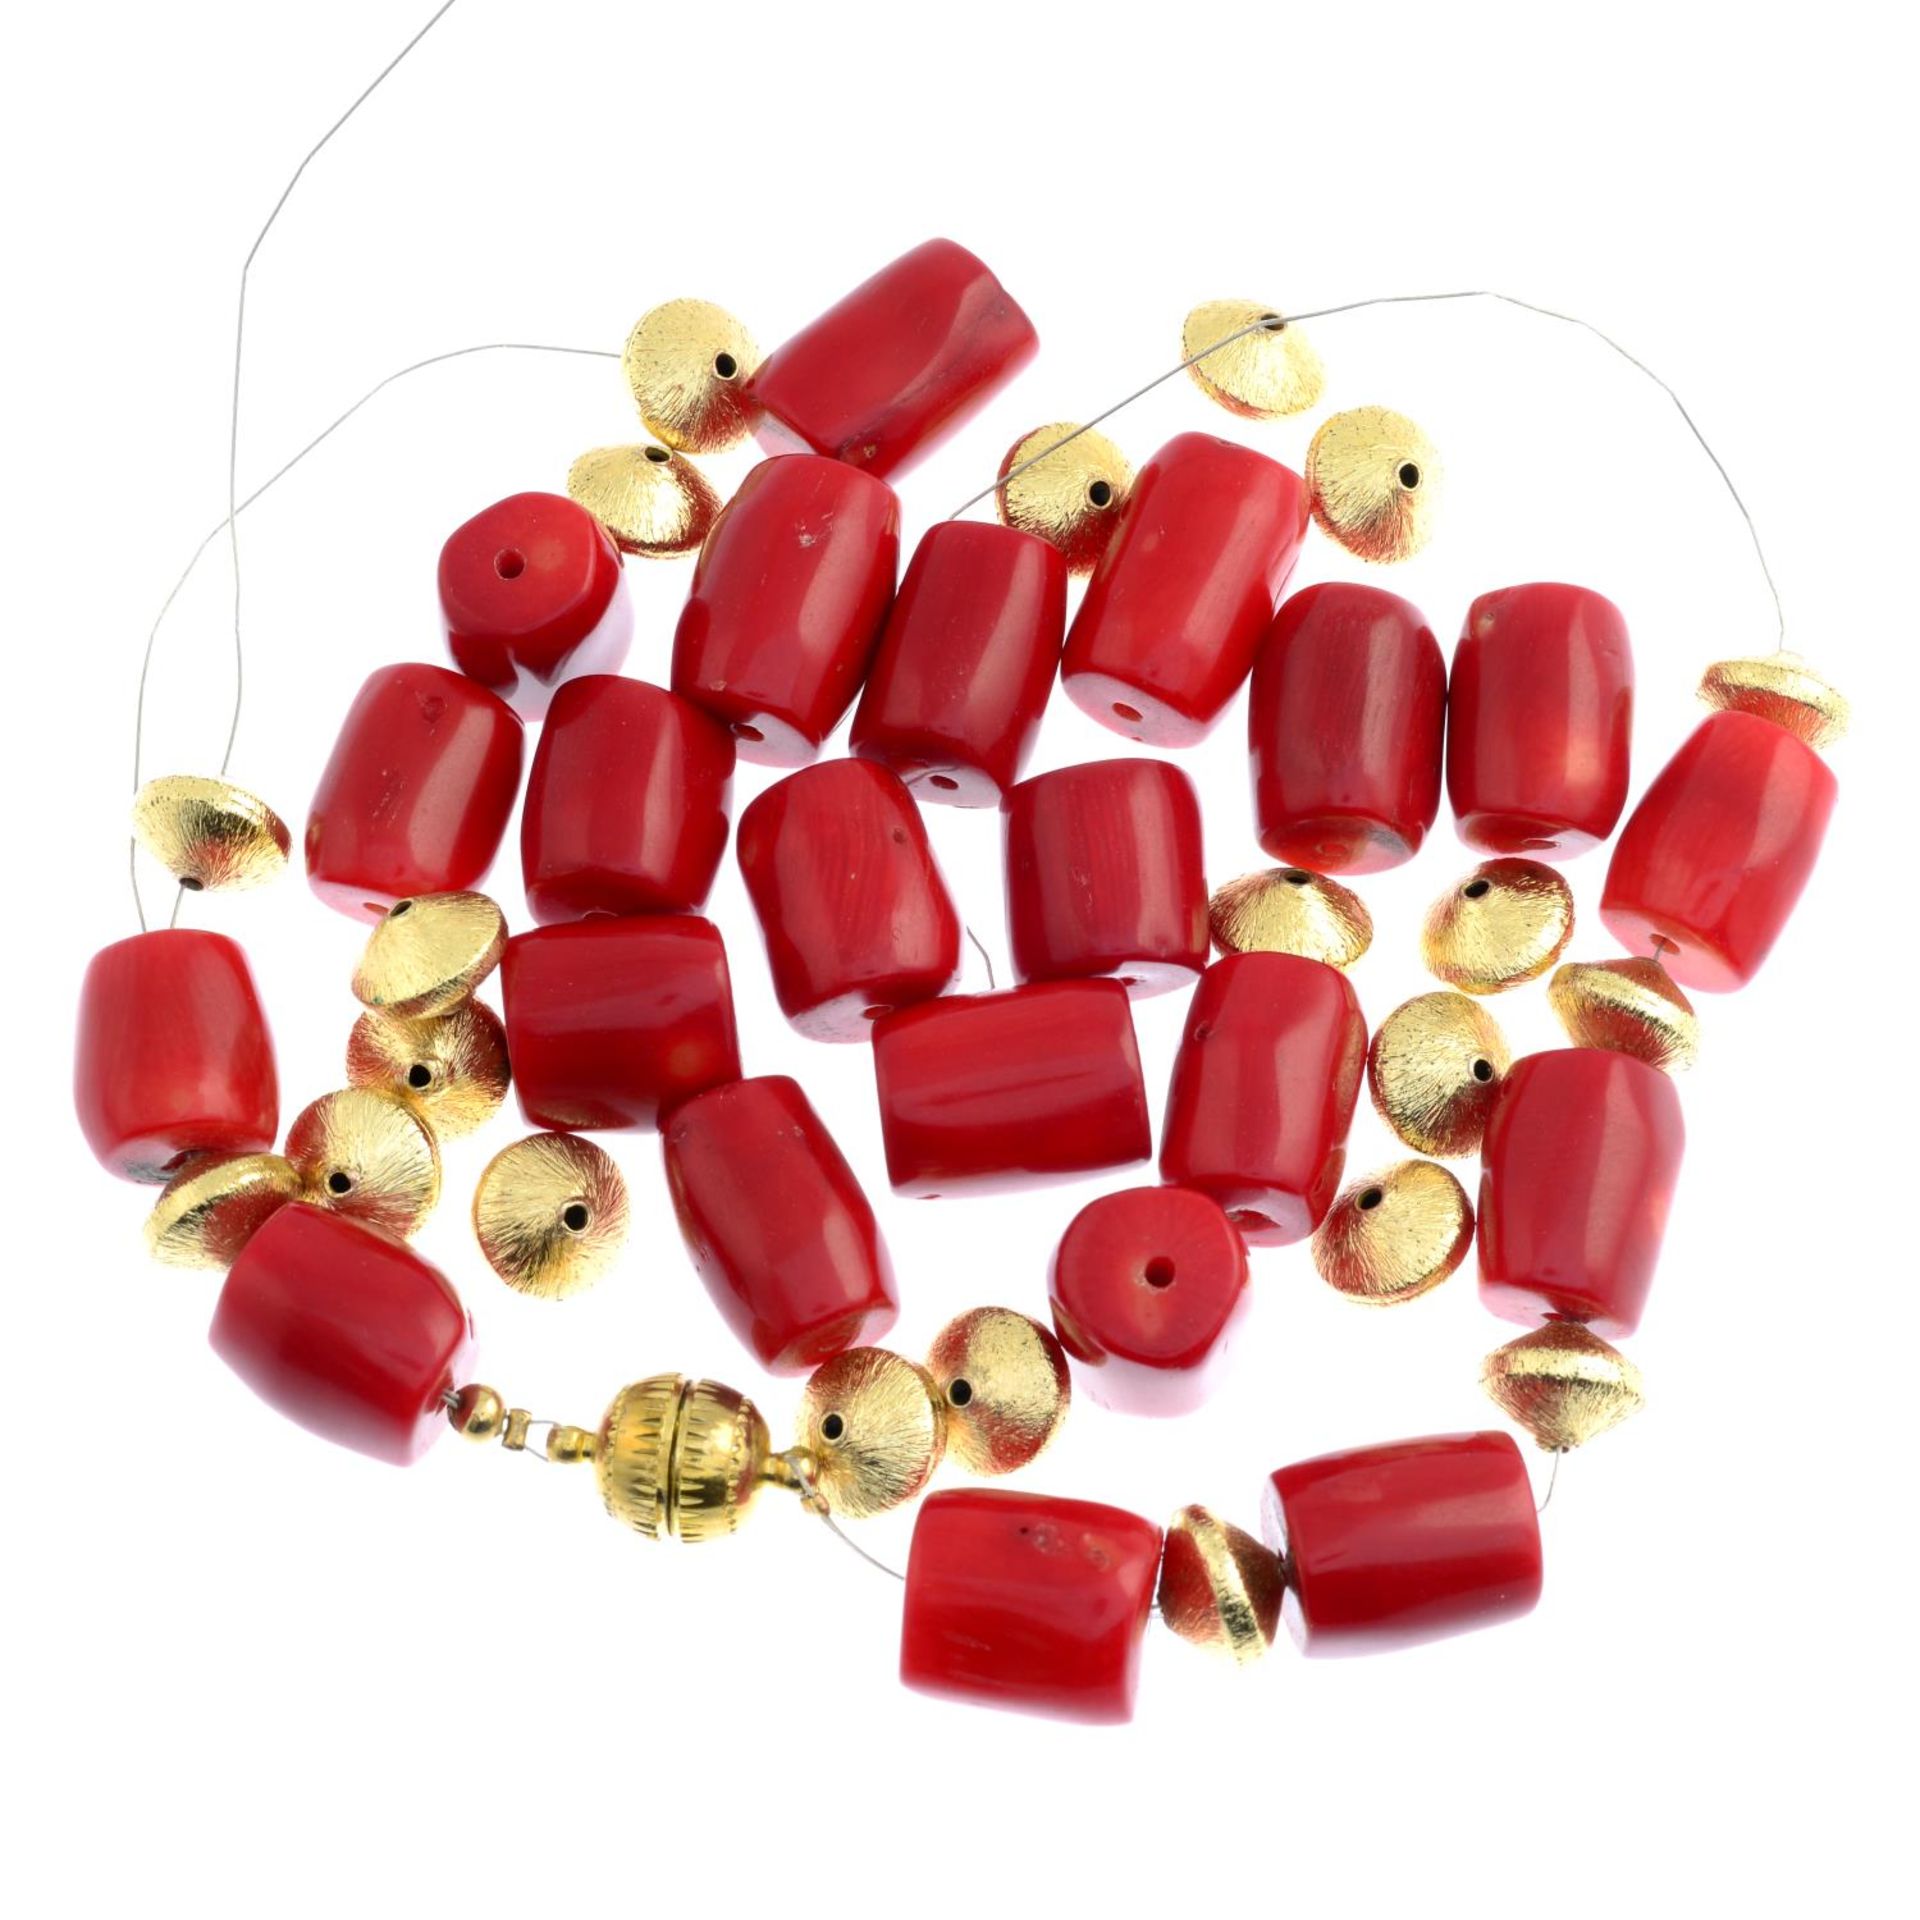 A stem coral necklace with bead spacers.